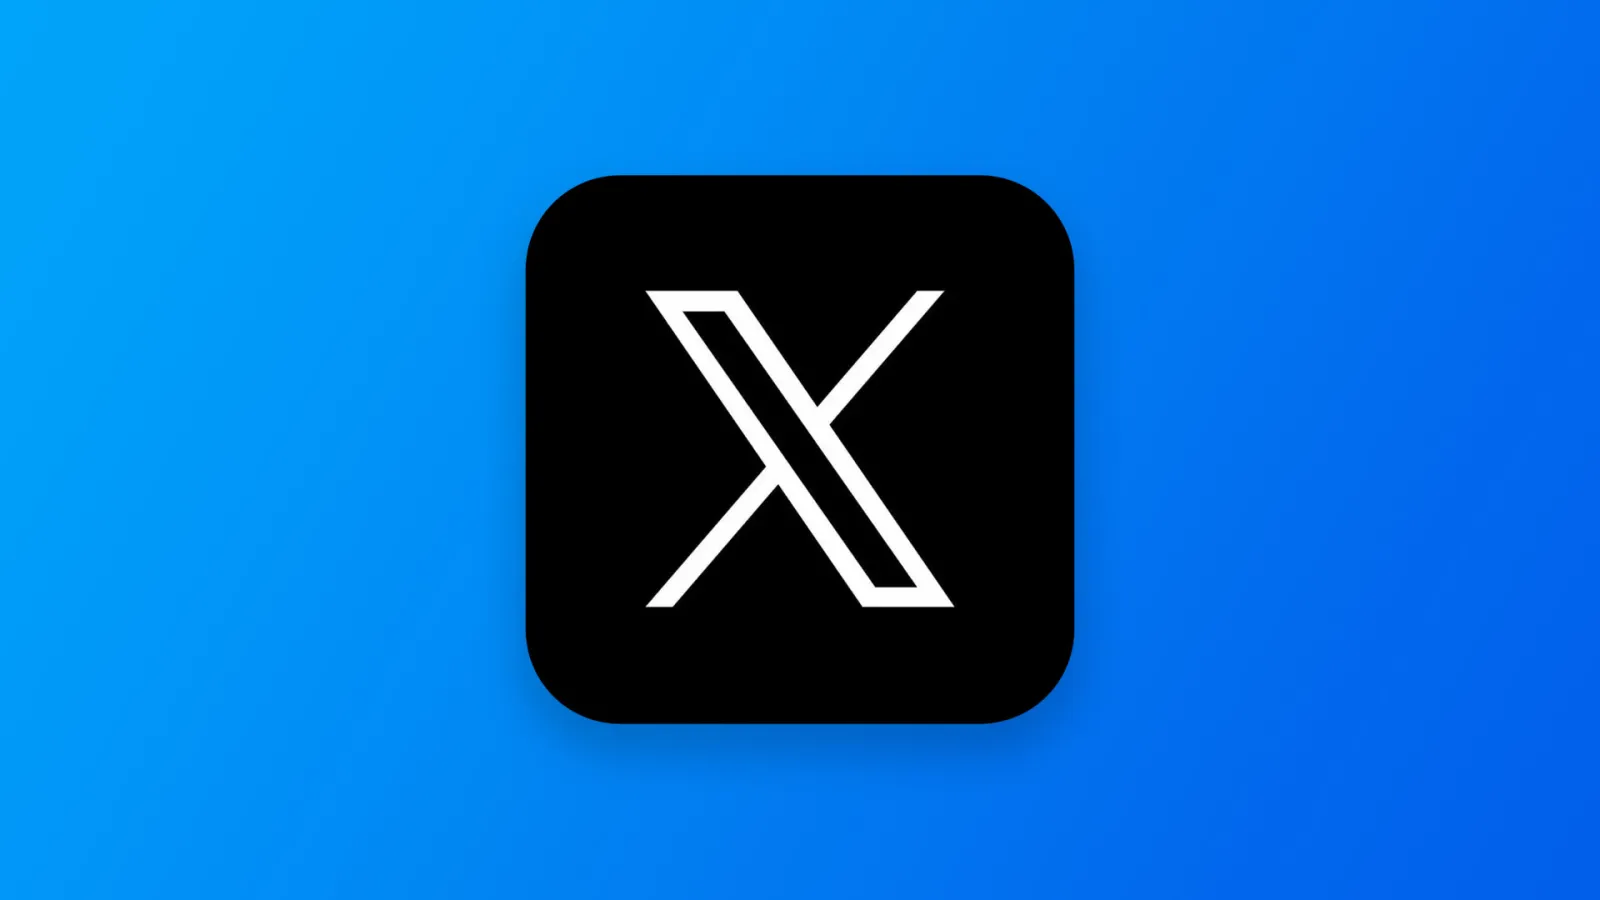 X Platform to Restrict Live Streaming to Premium Users